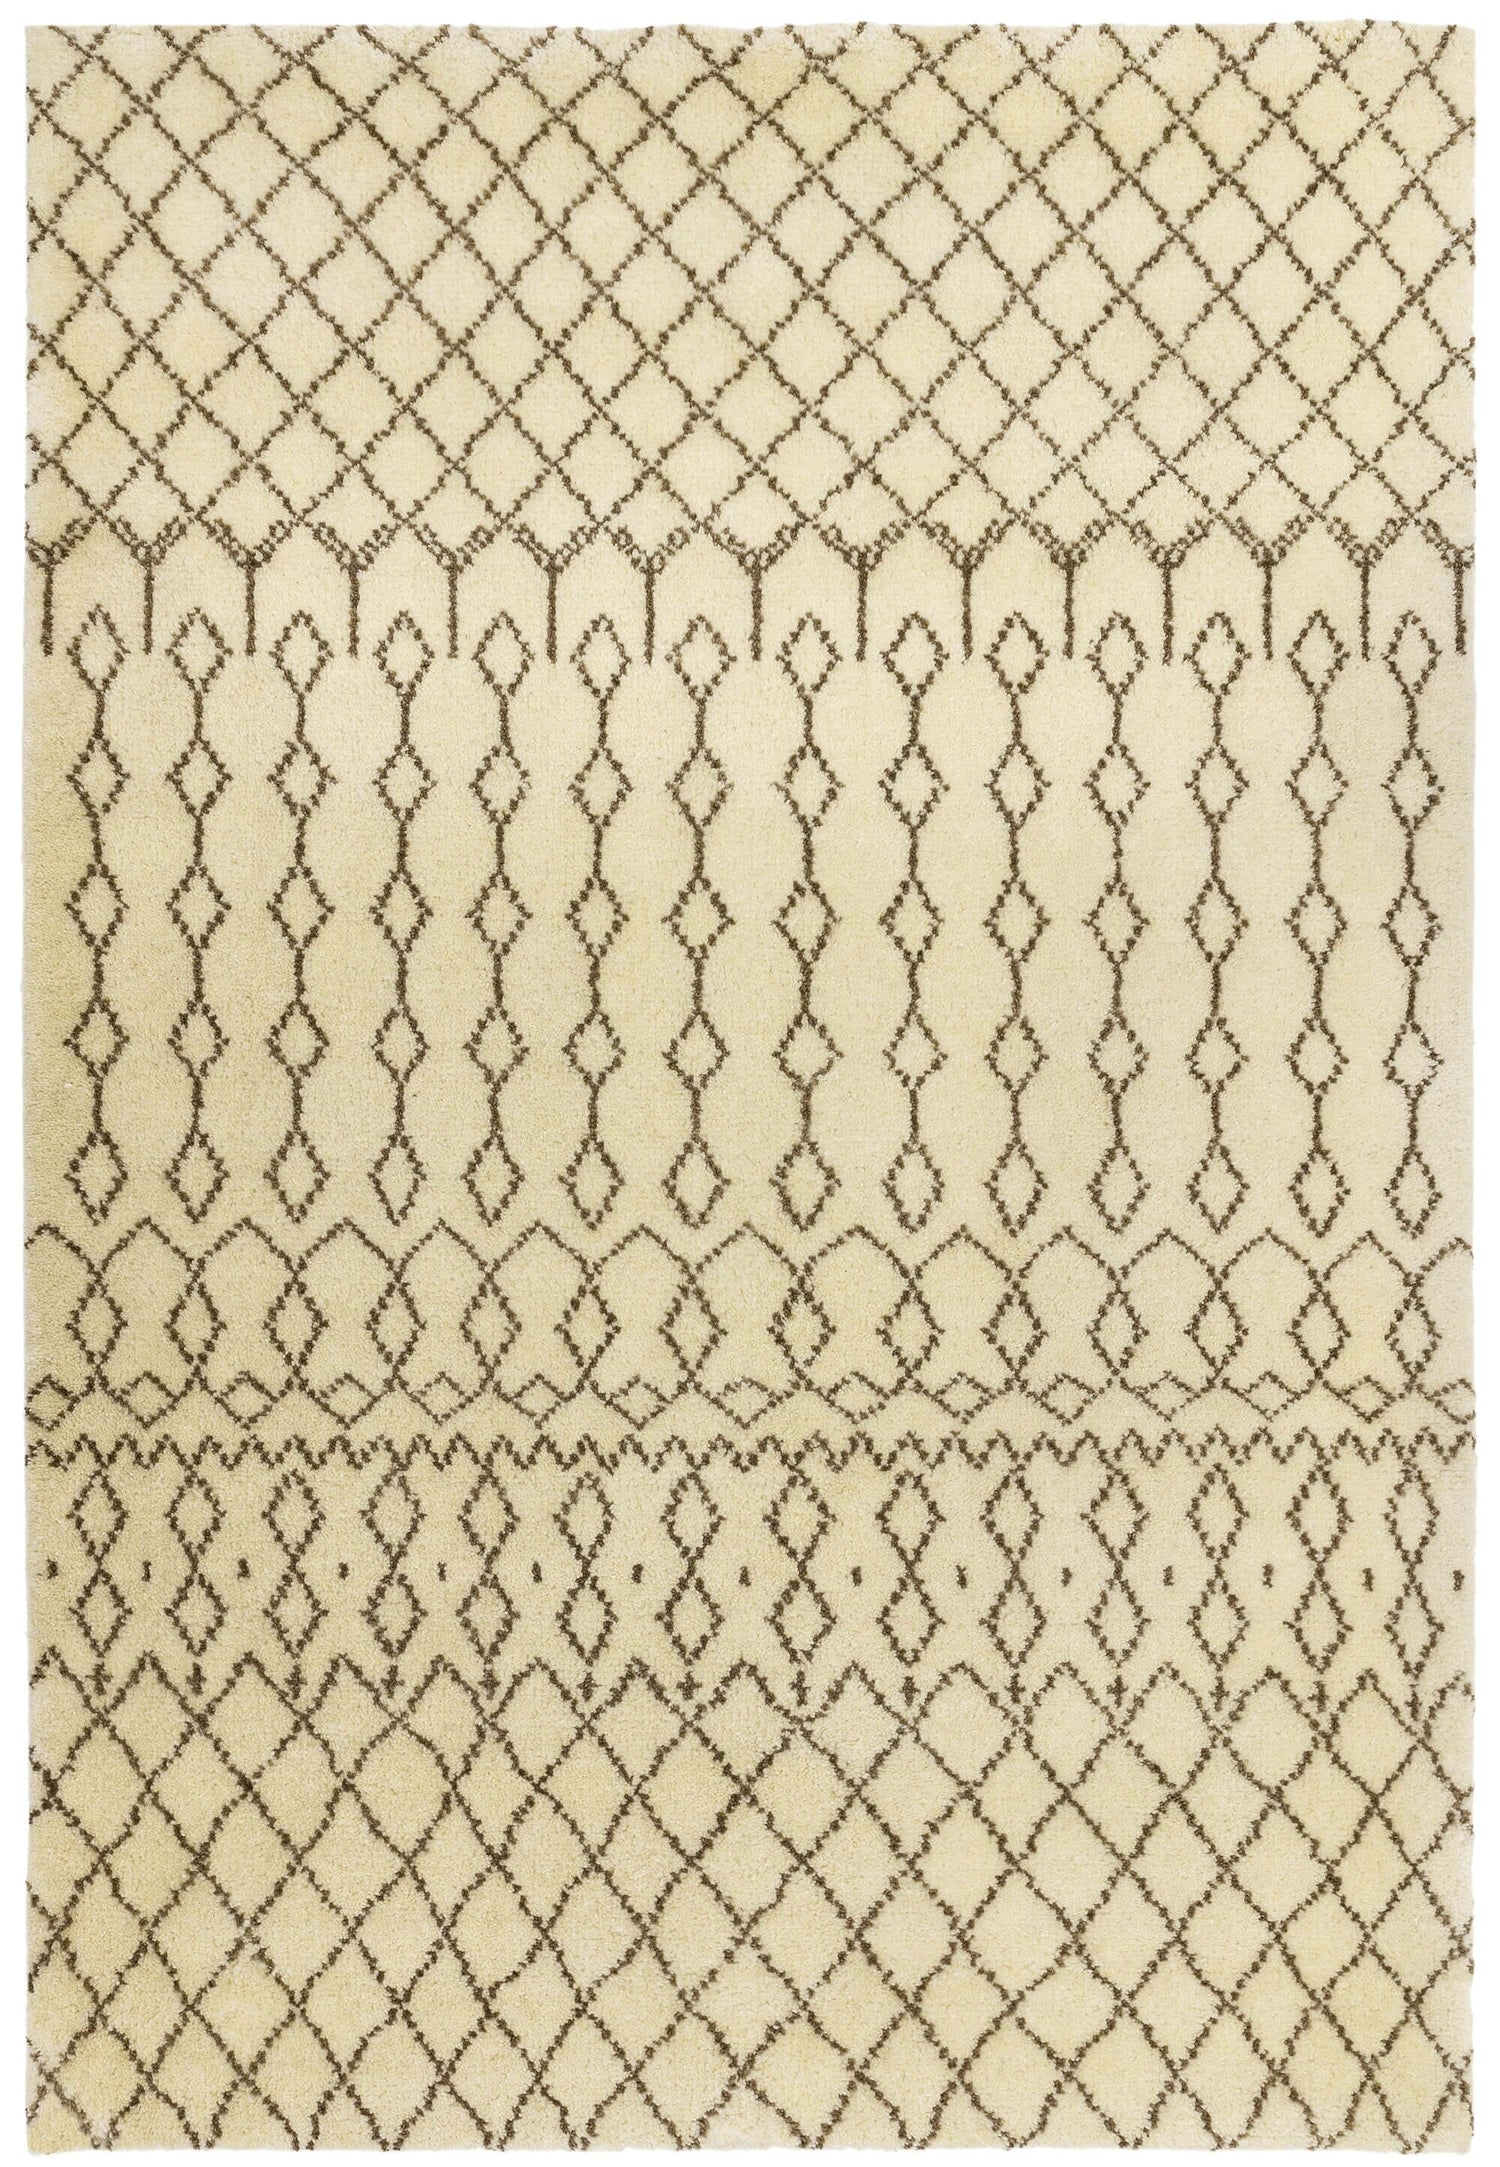  Asiatic Carpets-Asiatic Carpets Amira Hand Knotted Rug AM03 - 120 x 170cm-Black, White 541 